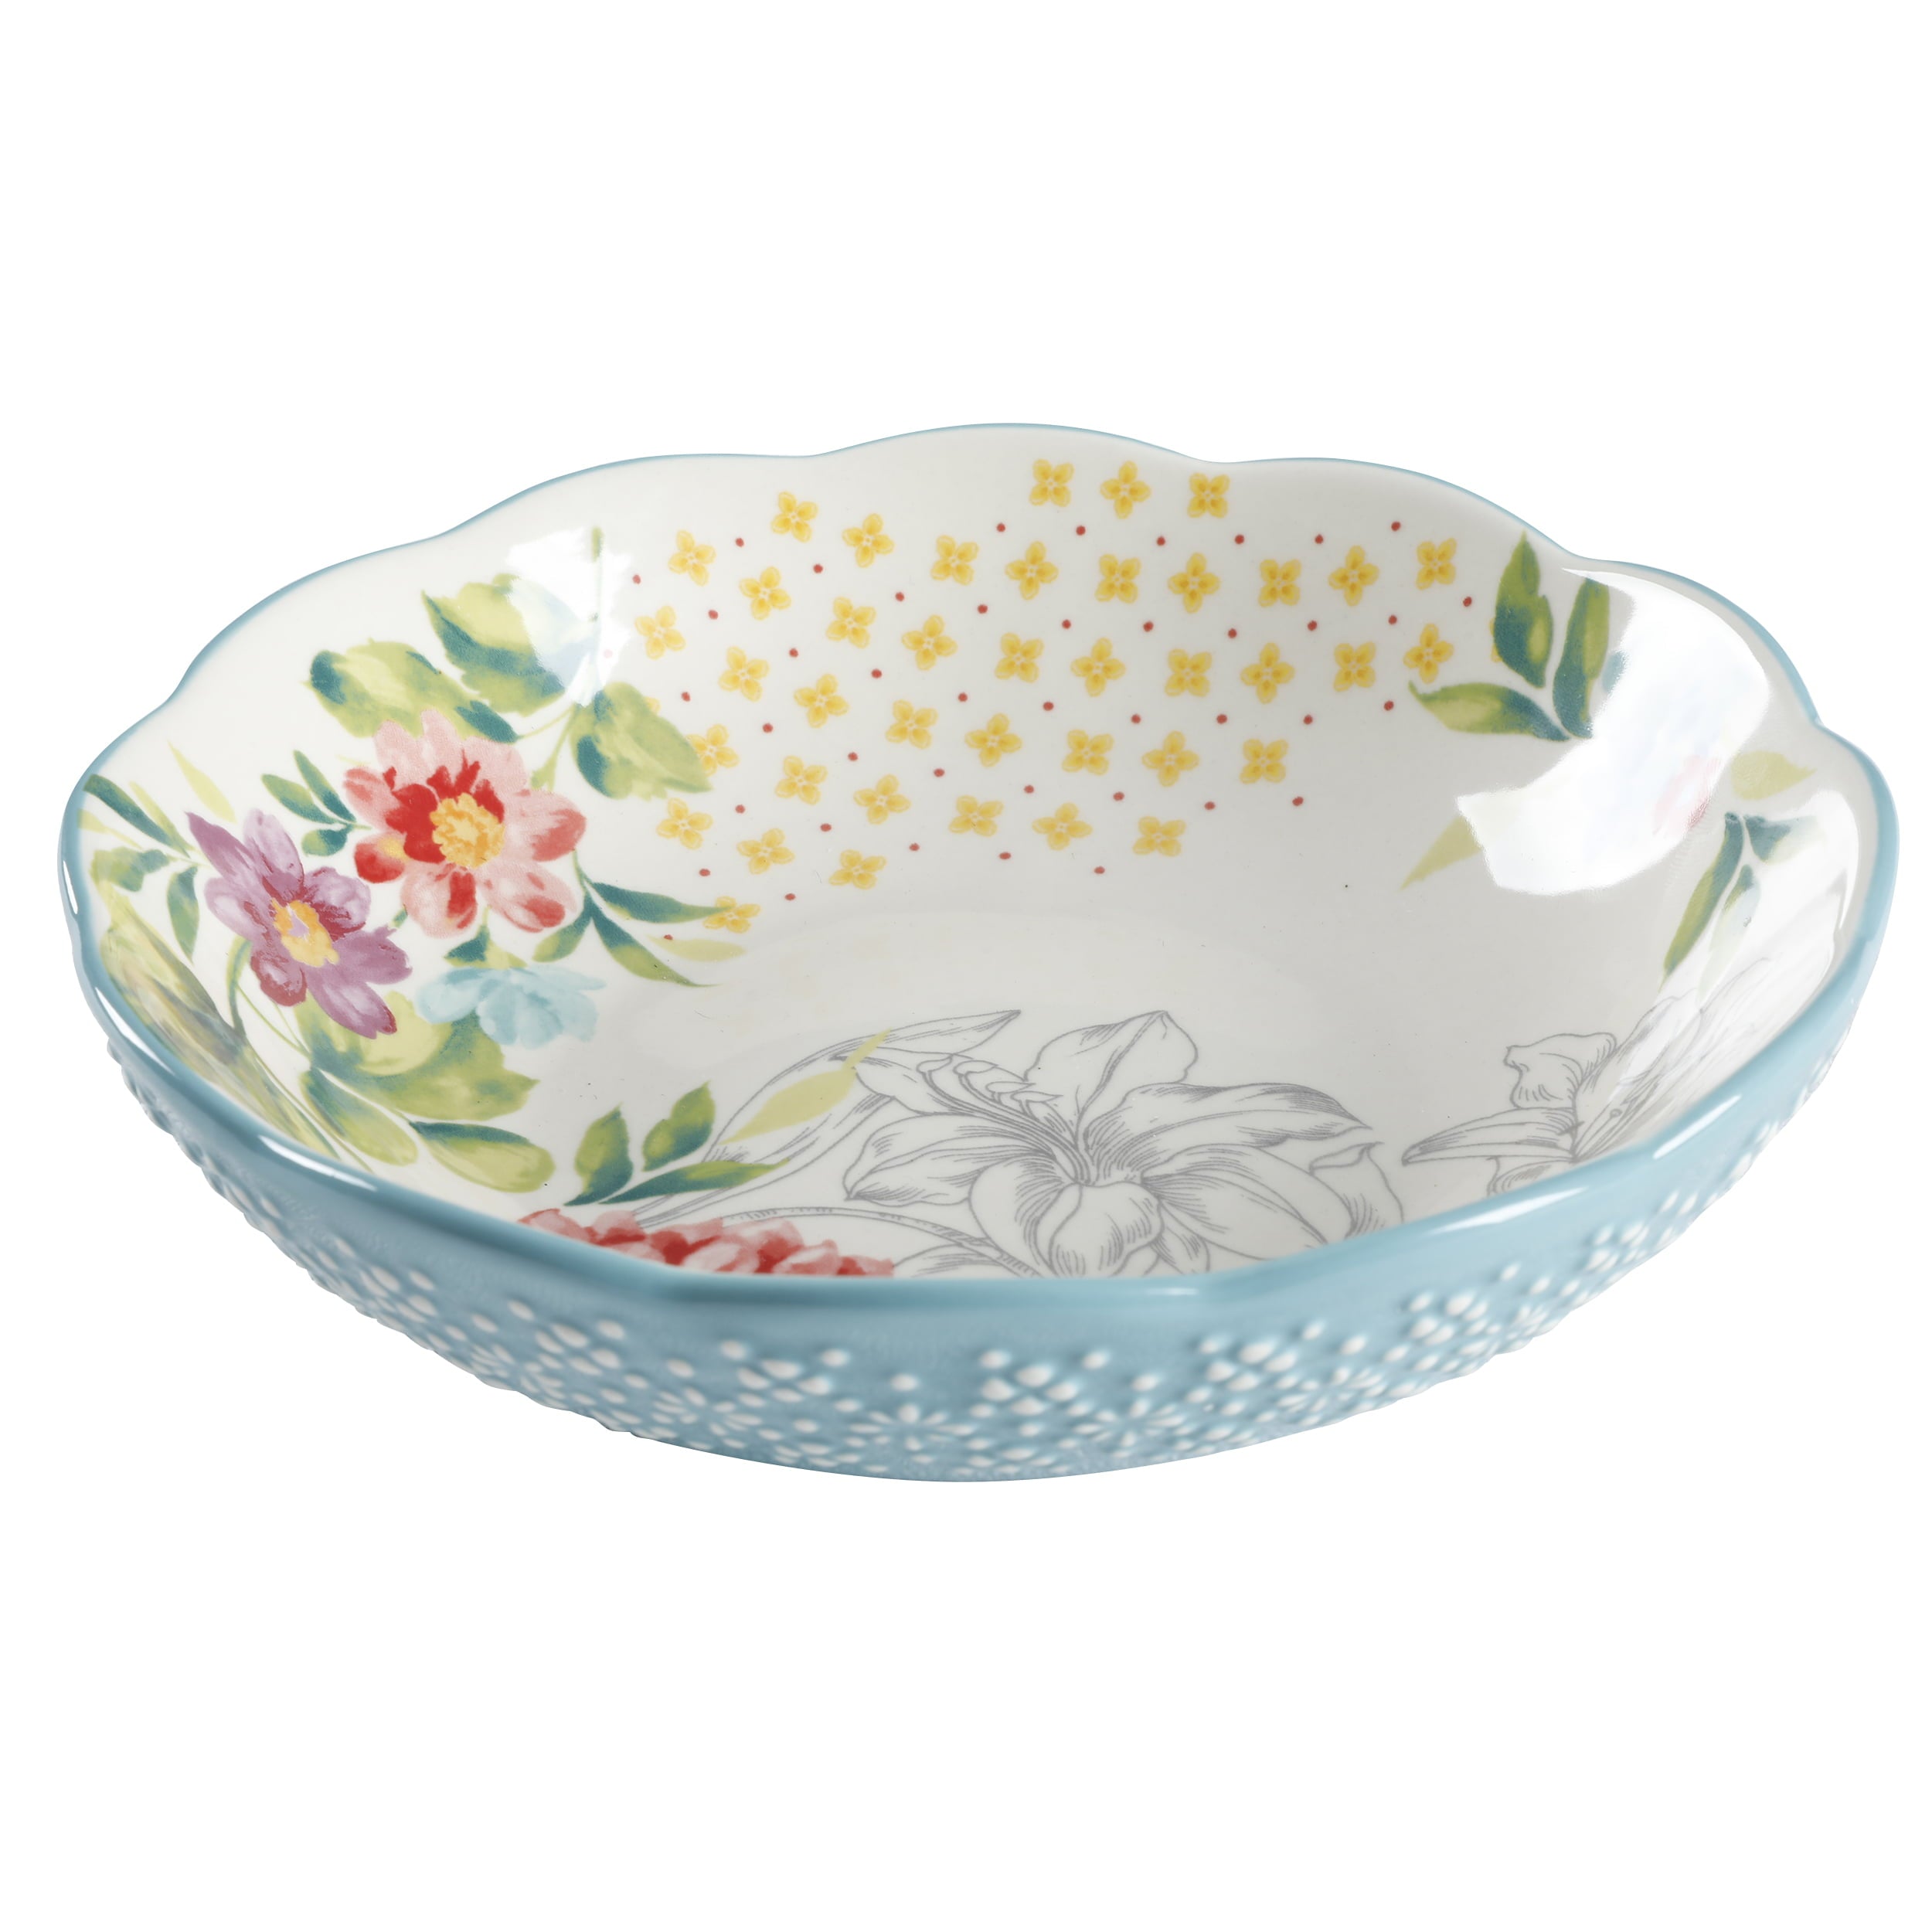 The Pioneer Woman Blooming Bouquet 7.5-Inch Pasta Bowl